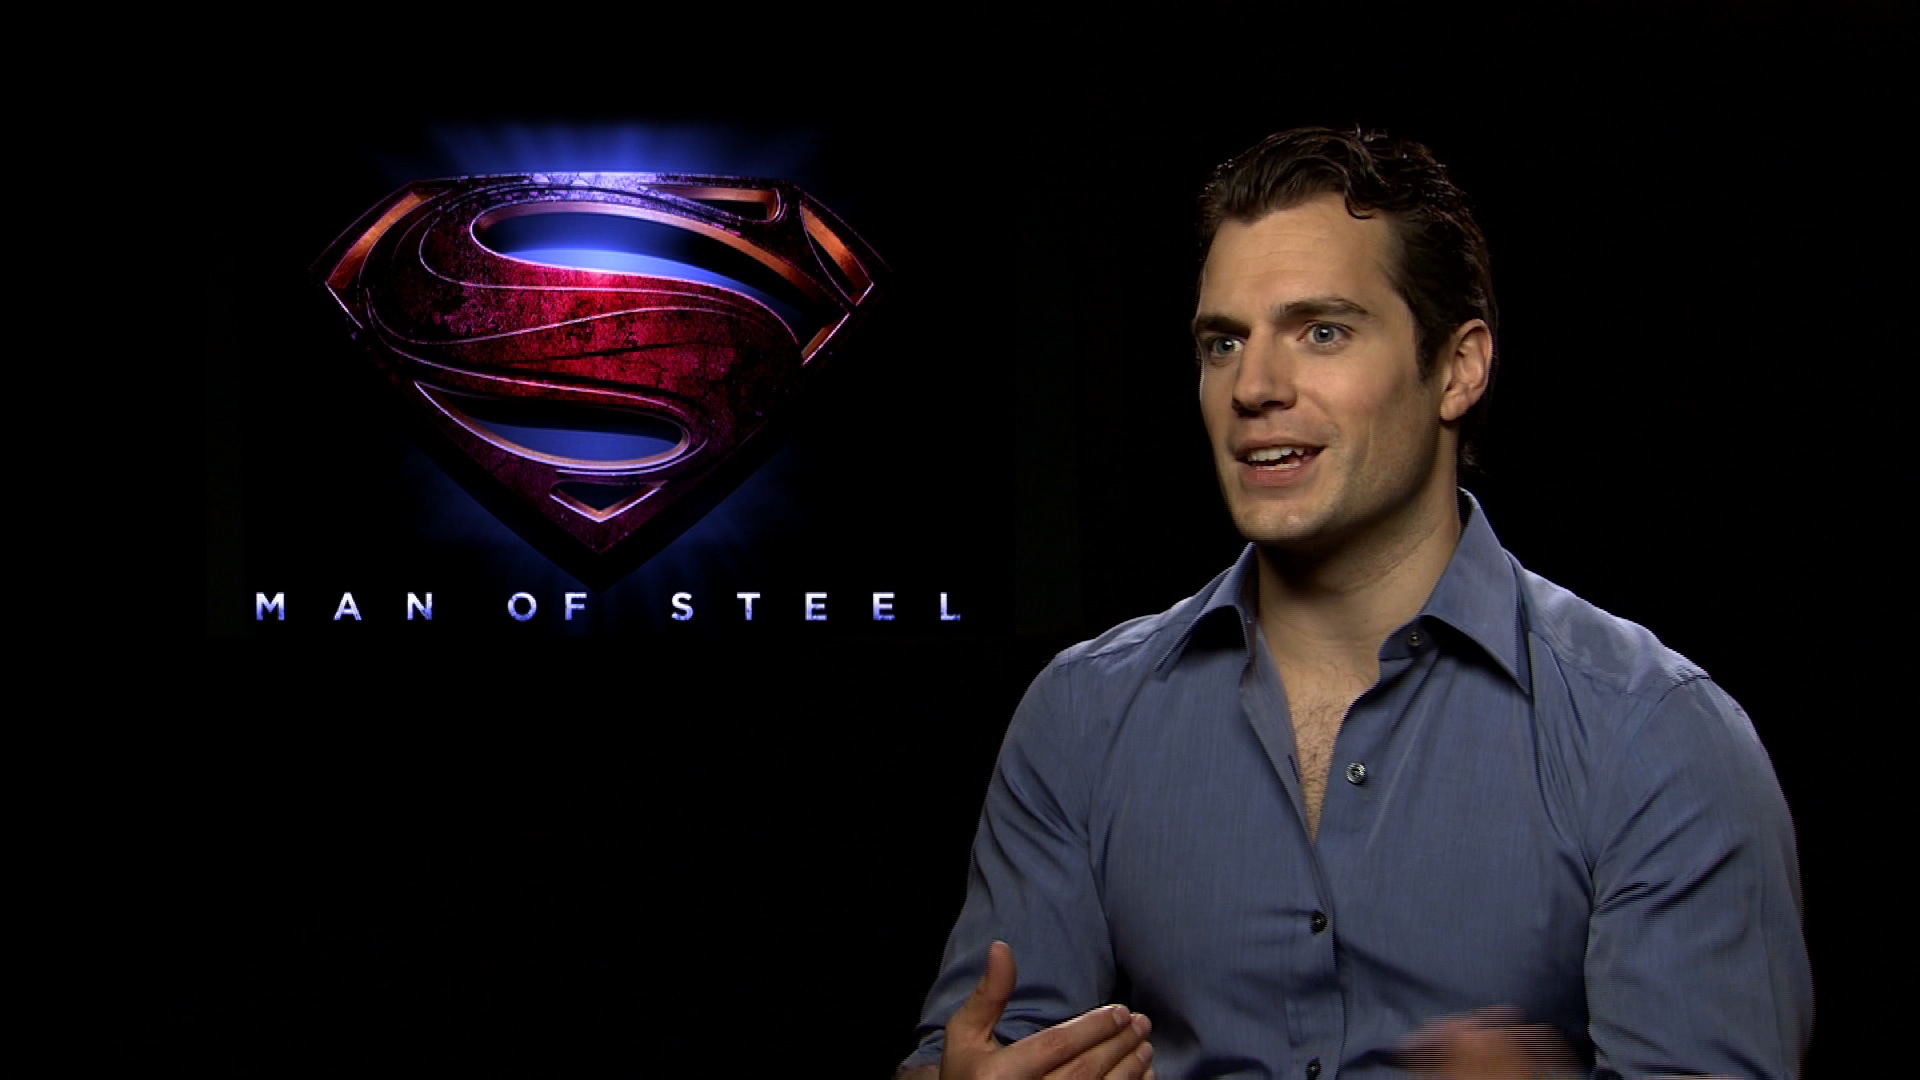 First Look at Henry Cavill as Superman In Dawn of Justice (Photos)